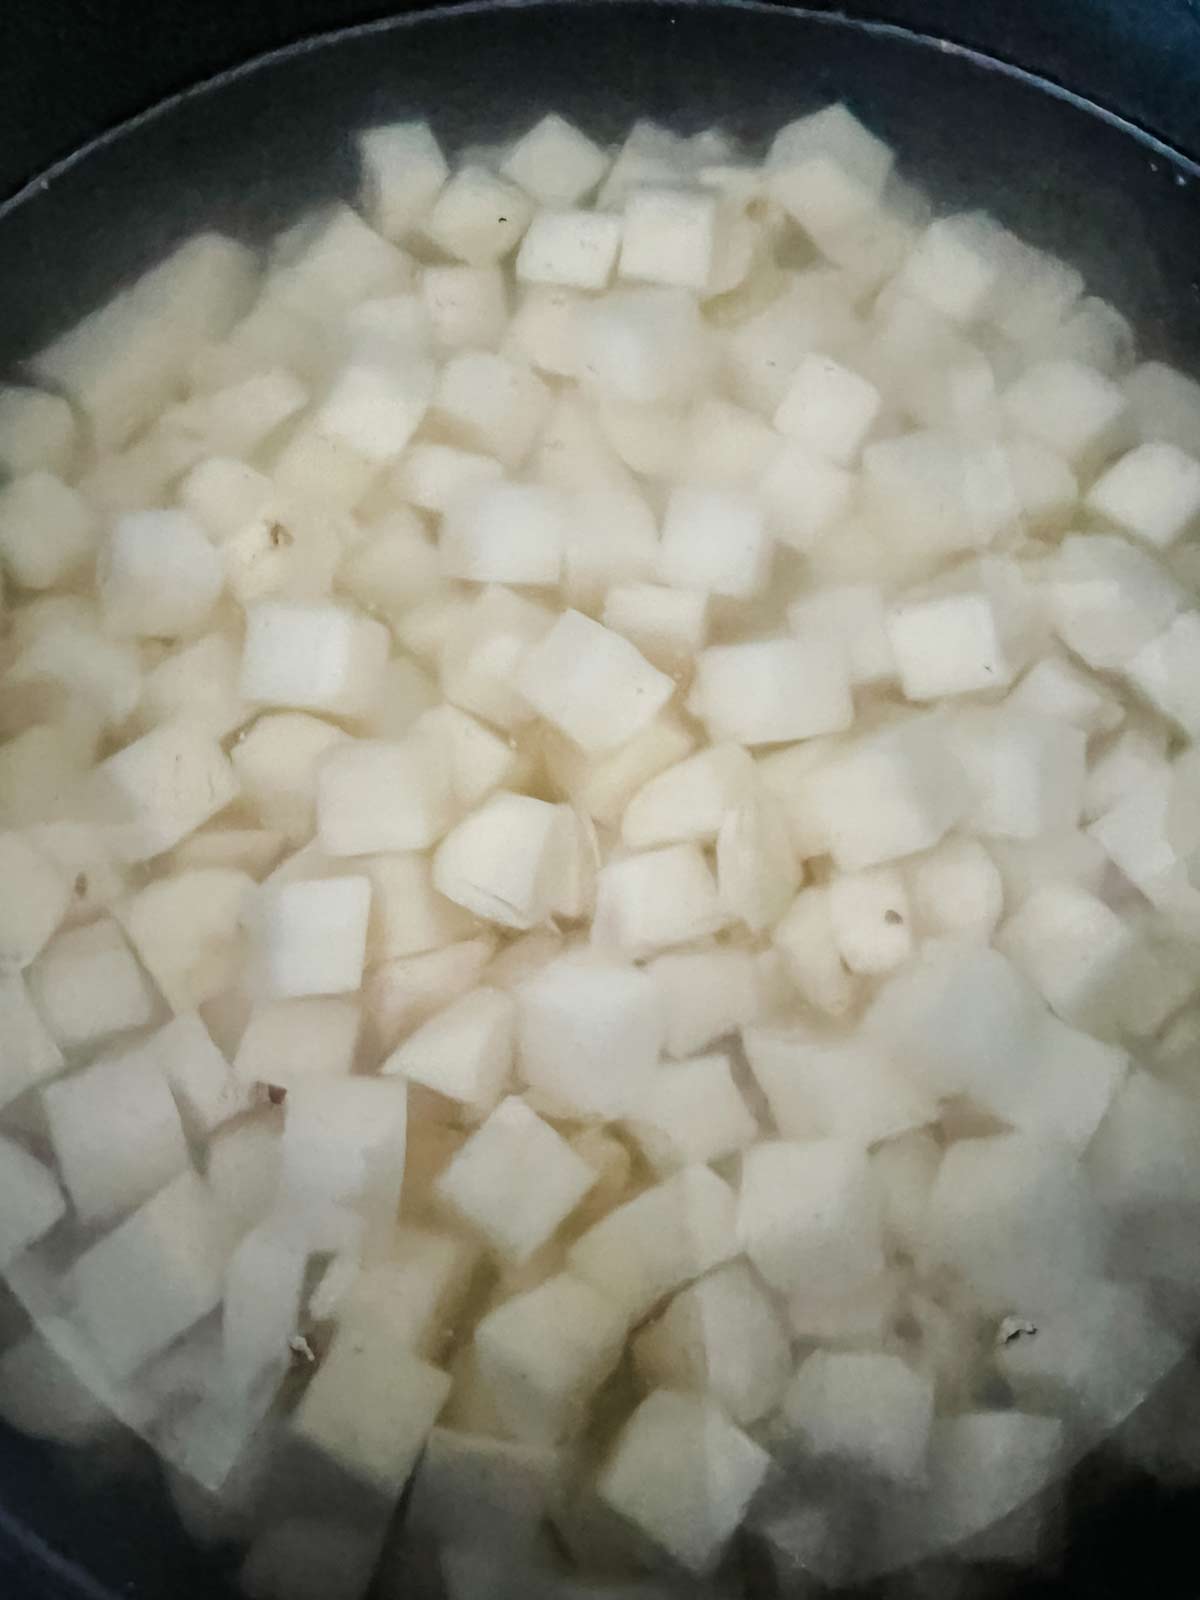 Cubed potatoes in a pot of water.